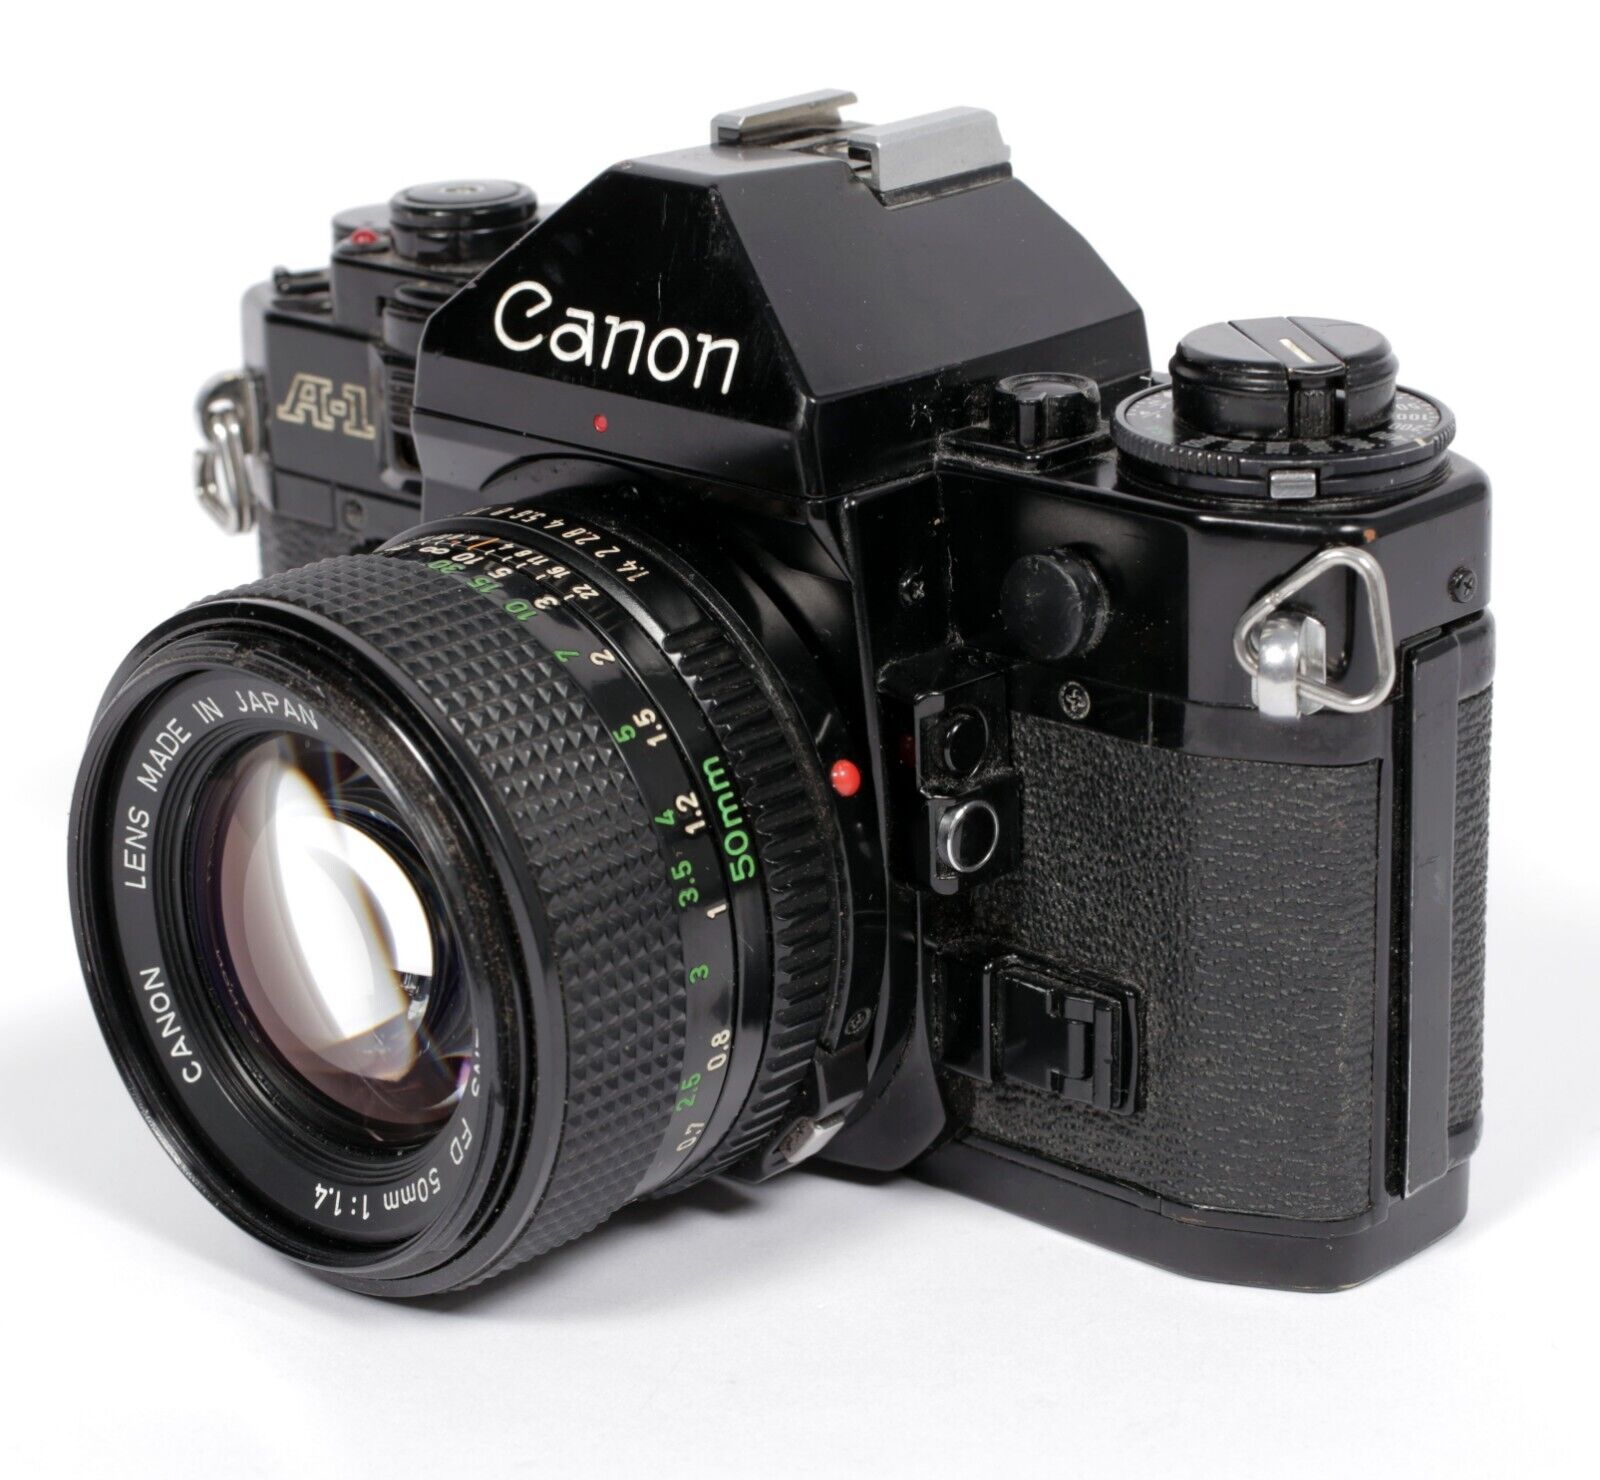 Canon A-1 35mm SLR Film Camera with 50mm F1.8 or F1.4 lens (6 